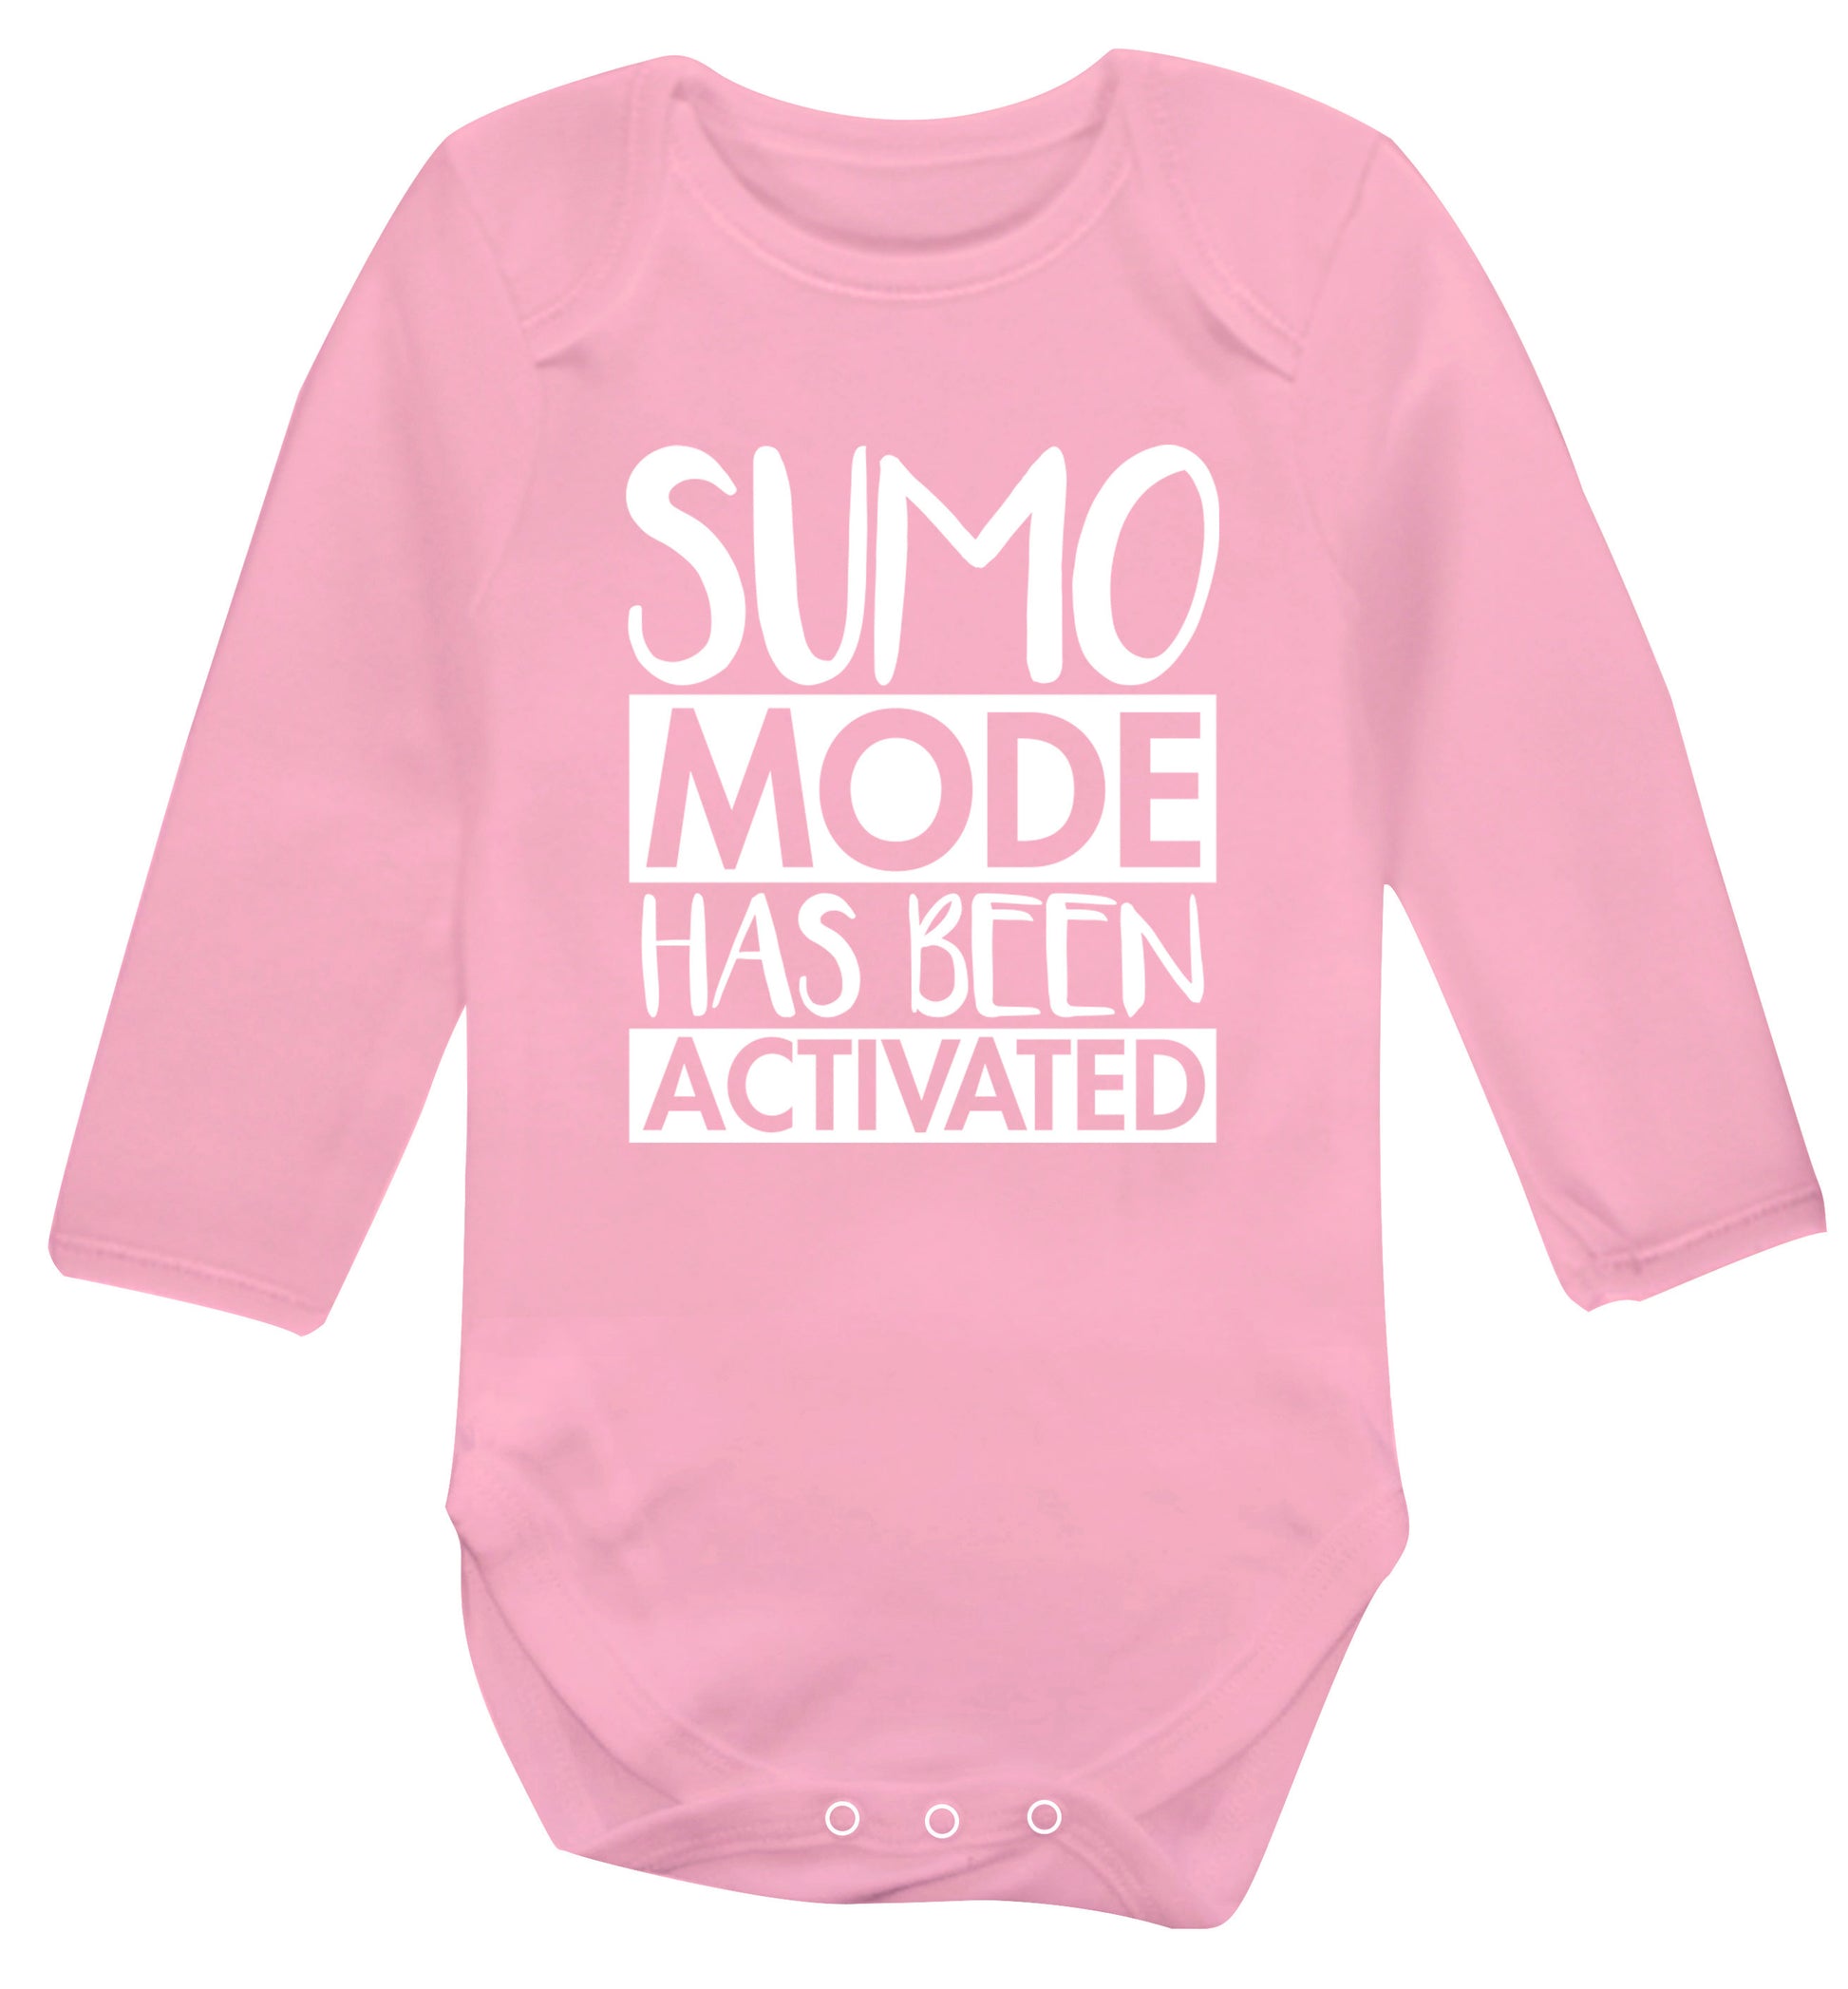 Sumo mode activated Baby Vest long sleeved pale pink 6-12 months